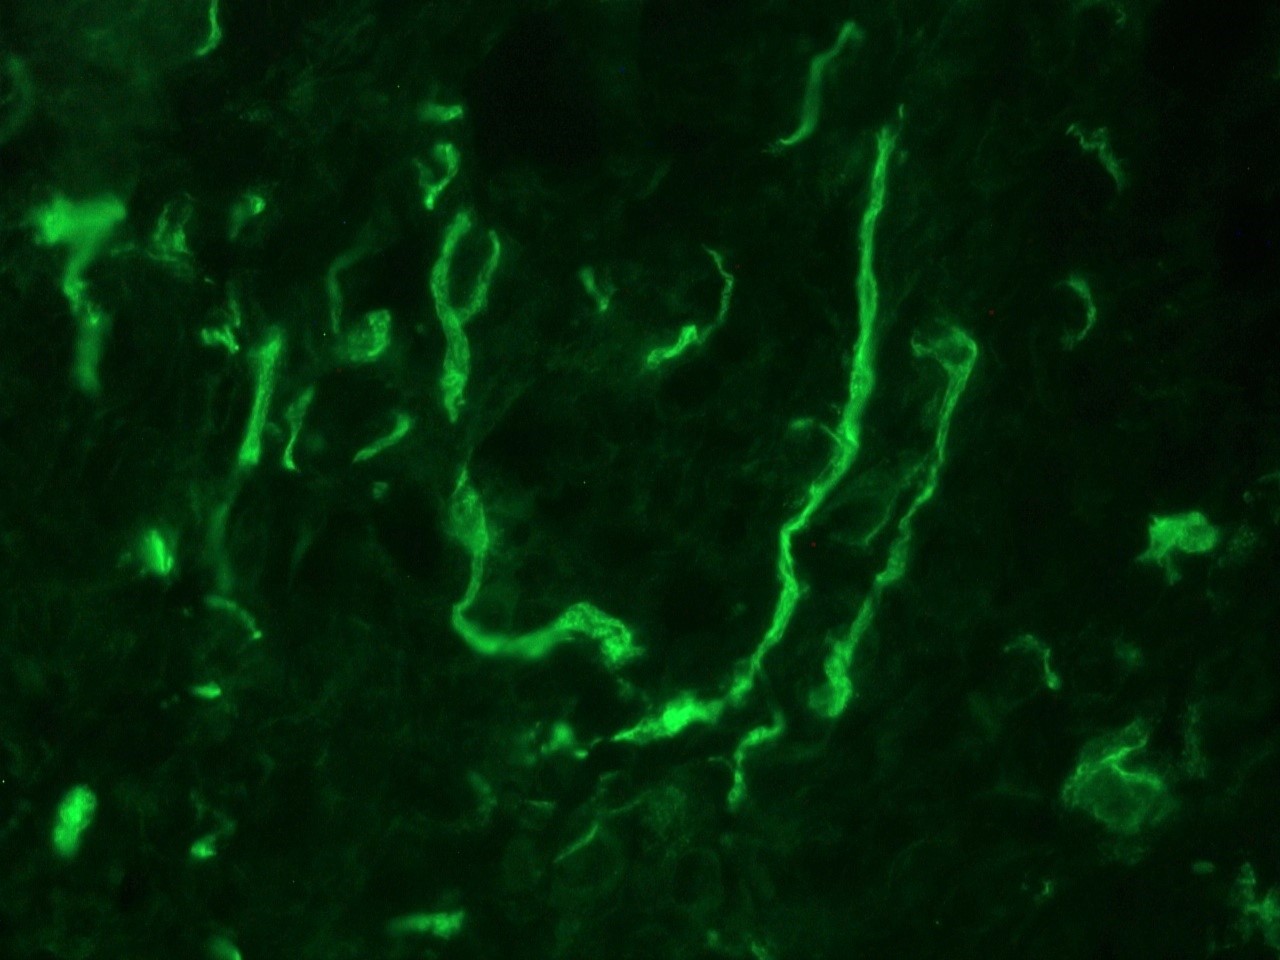 Figure 3. Indirect immunofluorescence staining of human urinary bladder frozen tissue sections with 0566P (diluted 1:500), showing the specific pattern of NCAM/CD56 in the nerves that innervate the tissue. As expected, no reactivity is seen in the epithelial cell compartment, muscle or connective tissue.